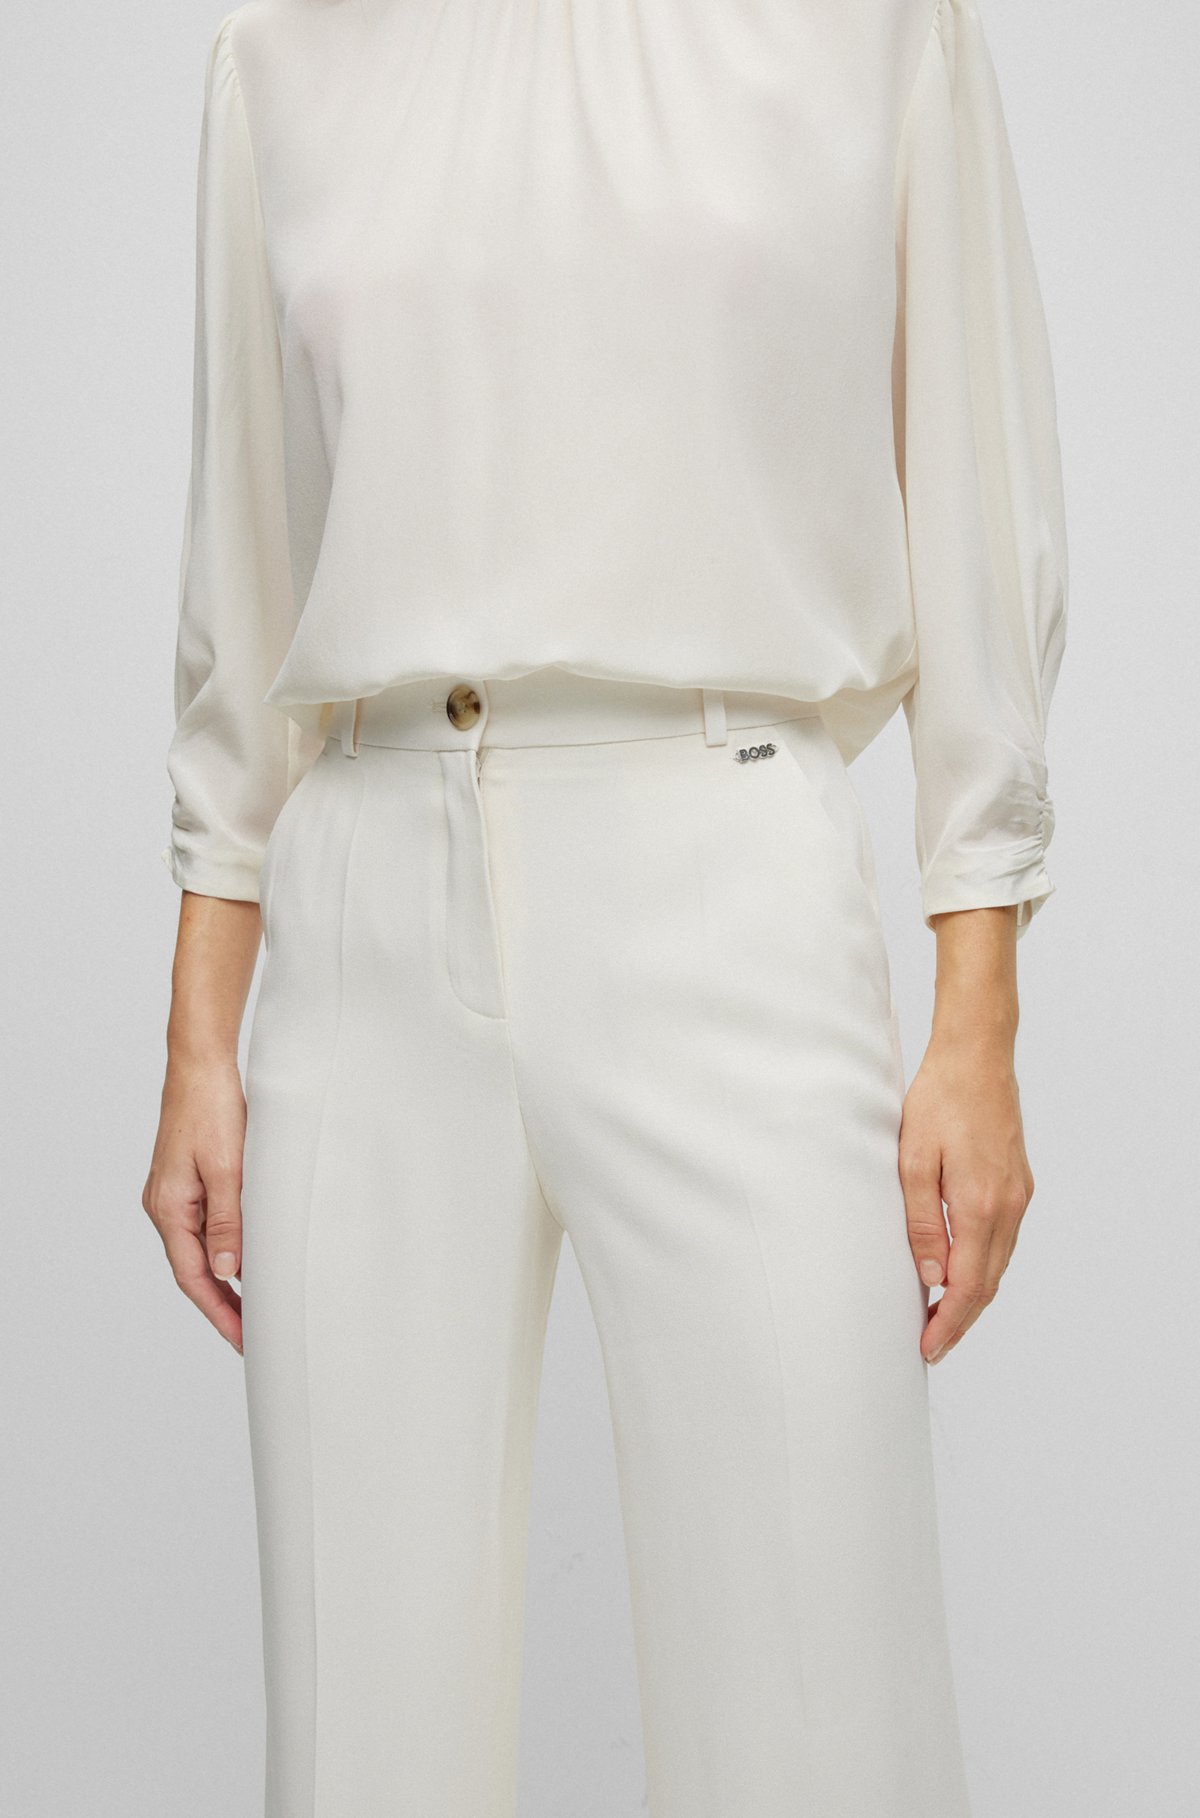 Regular-fit trousers with bootcut leg, White